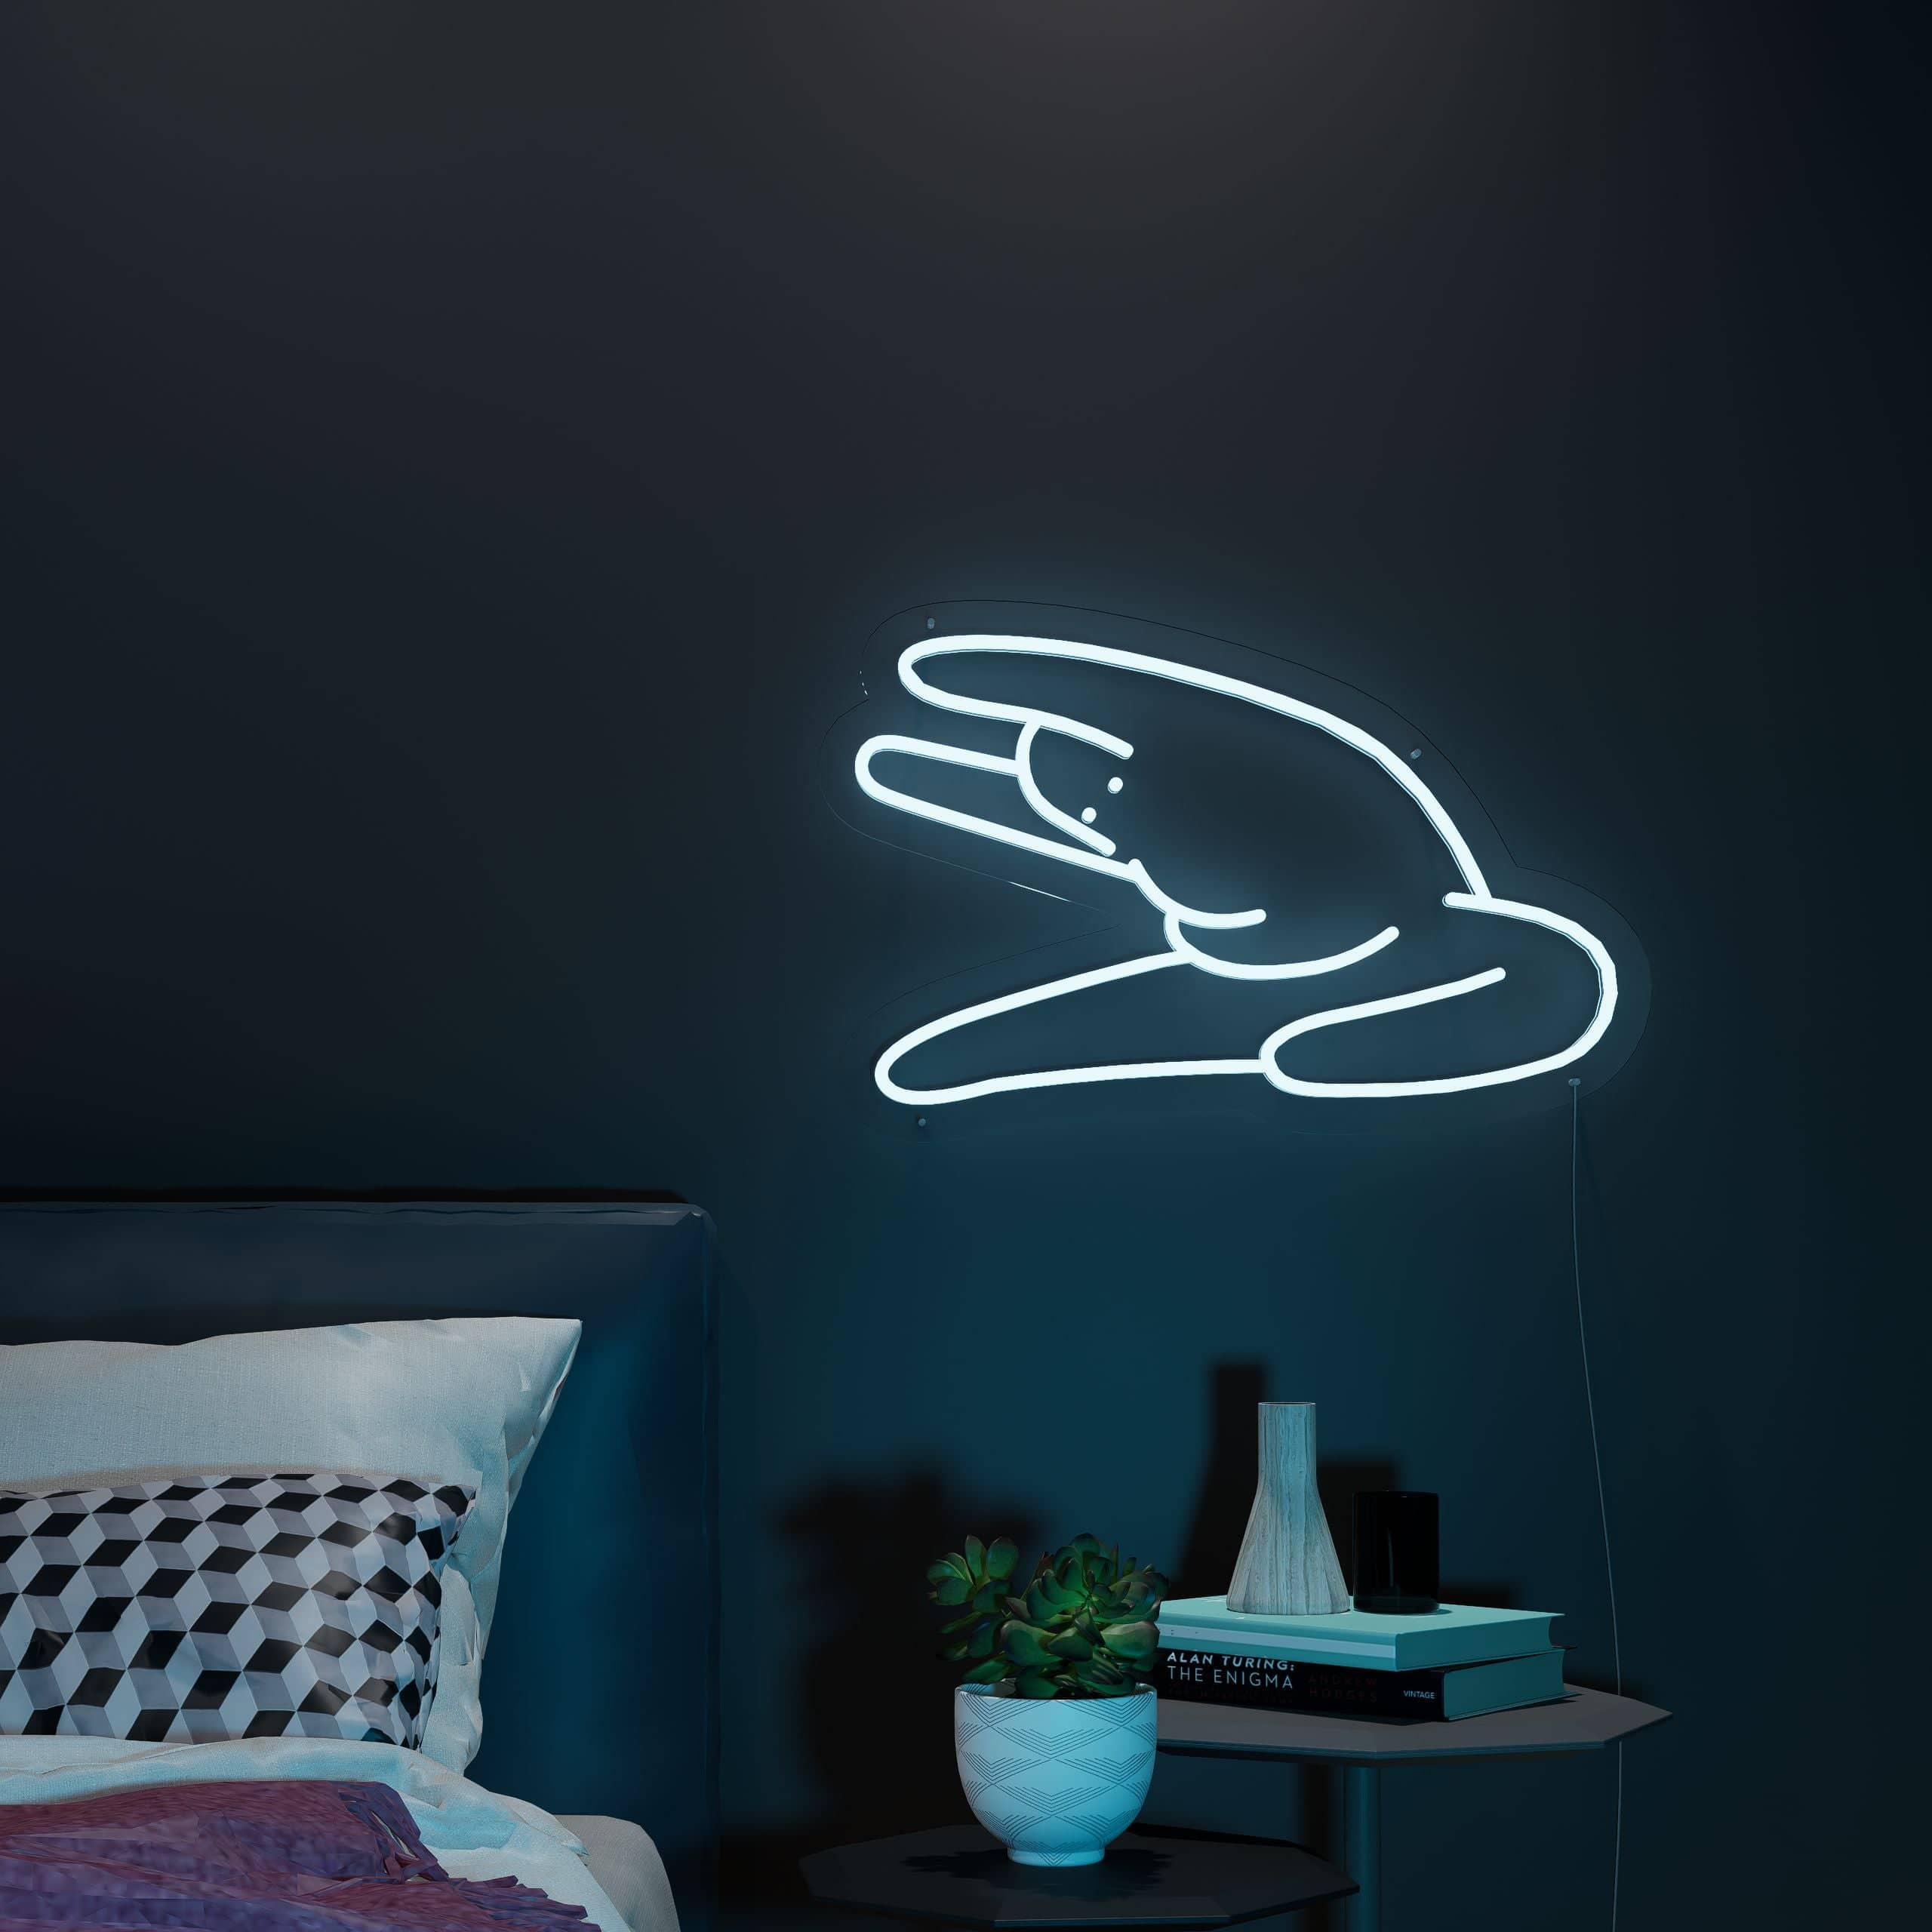 Create laughs at home with a funny neon sign